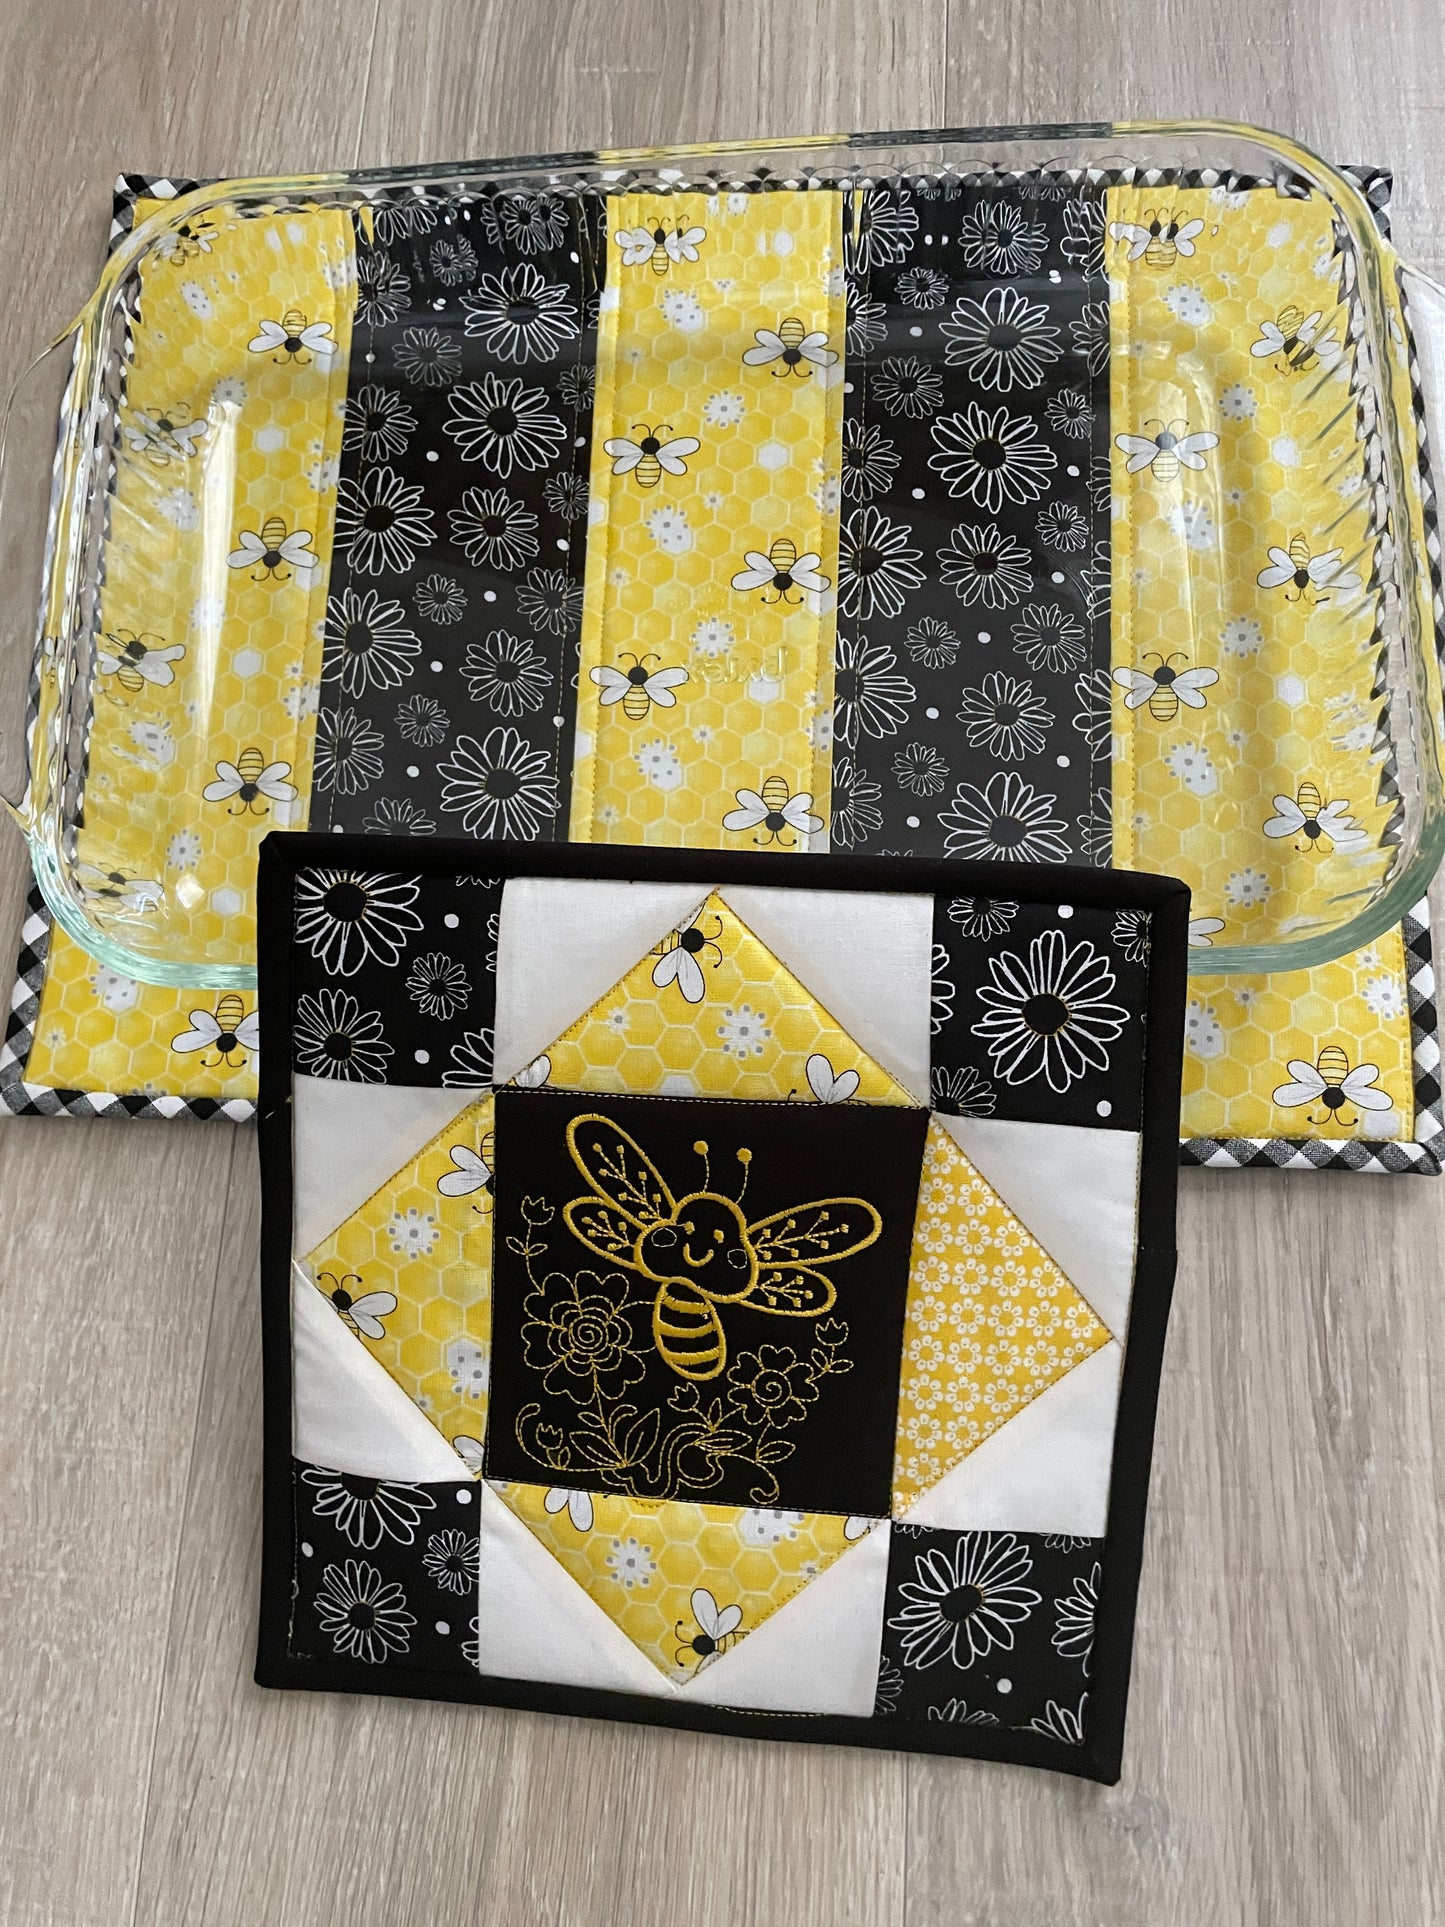 Quilted Casserole Hot Pad, Scrappy Patchwork Trivet and Potholder Gift